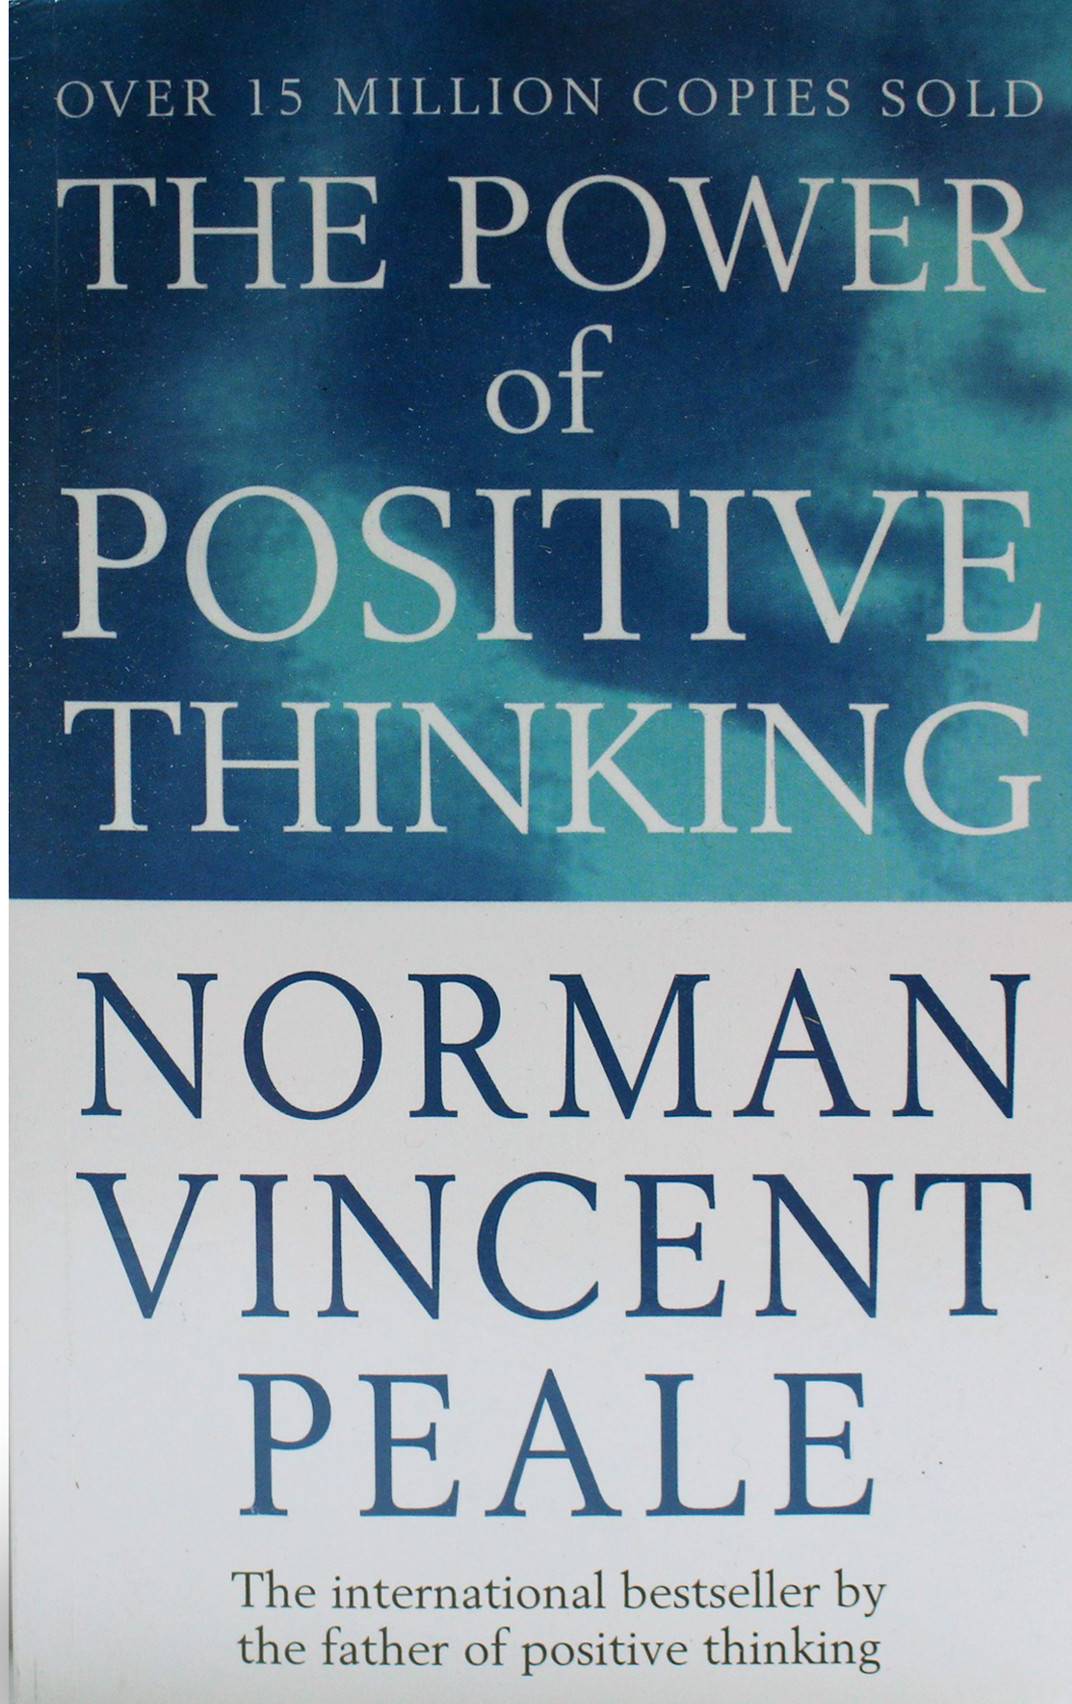 The Power Of Positive Thinking 